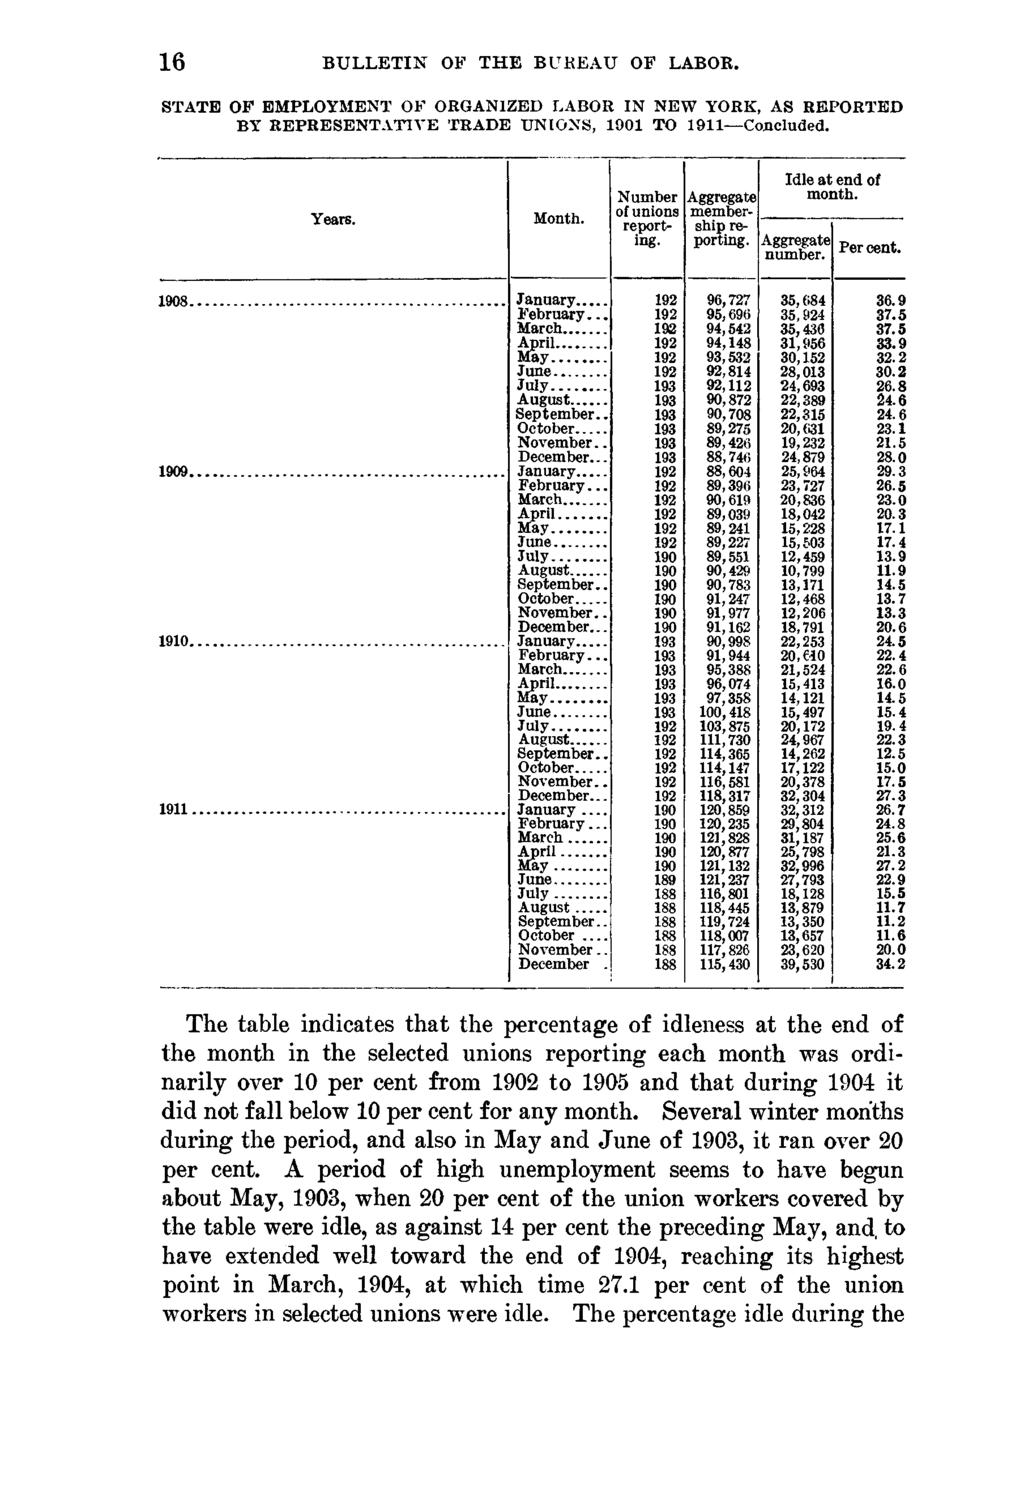 16 BULLETIN OF THE BUREAU OF LABOR. STATE OF EMPLOYMENT OF ORGANIZED LABOR IN NEW YORK, AS REPORTED BY REPRESENTATIVE TRADE UNIONS, 1901 TO 1911 Concluded. Years. Month. Number of unions reporting.